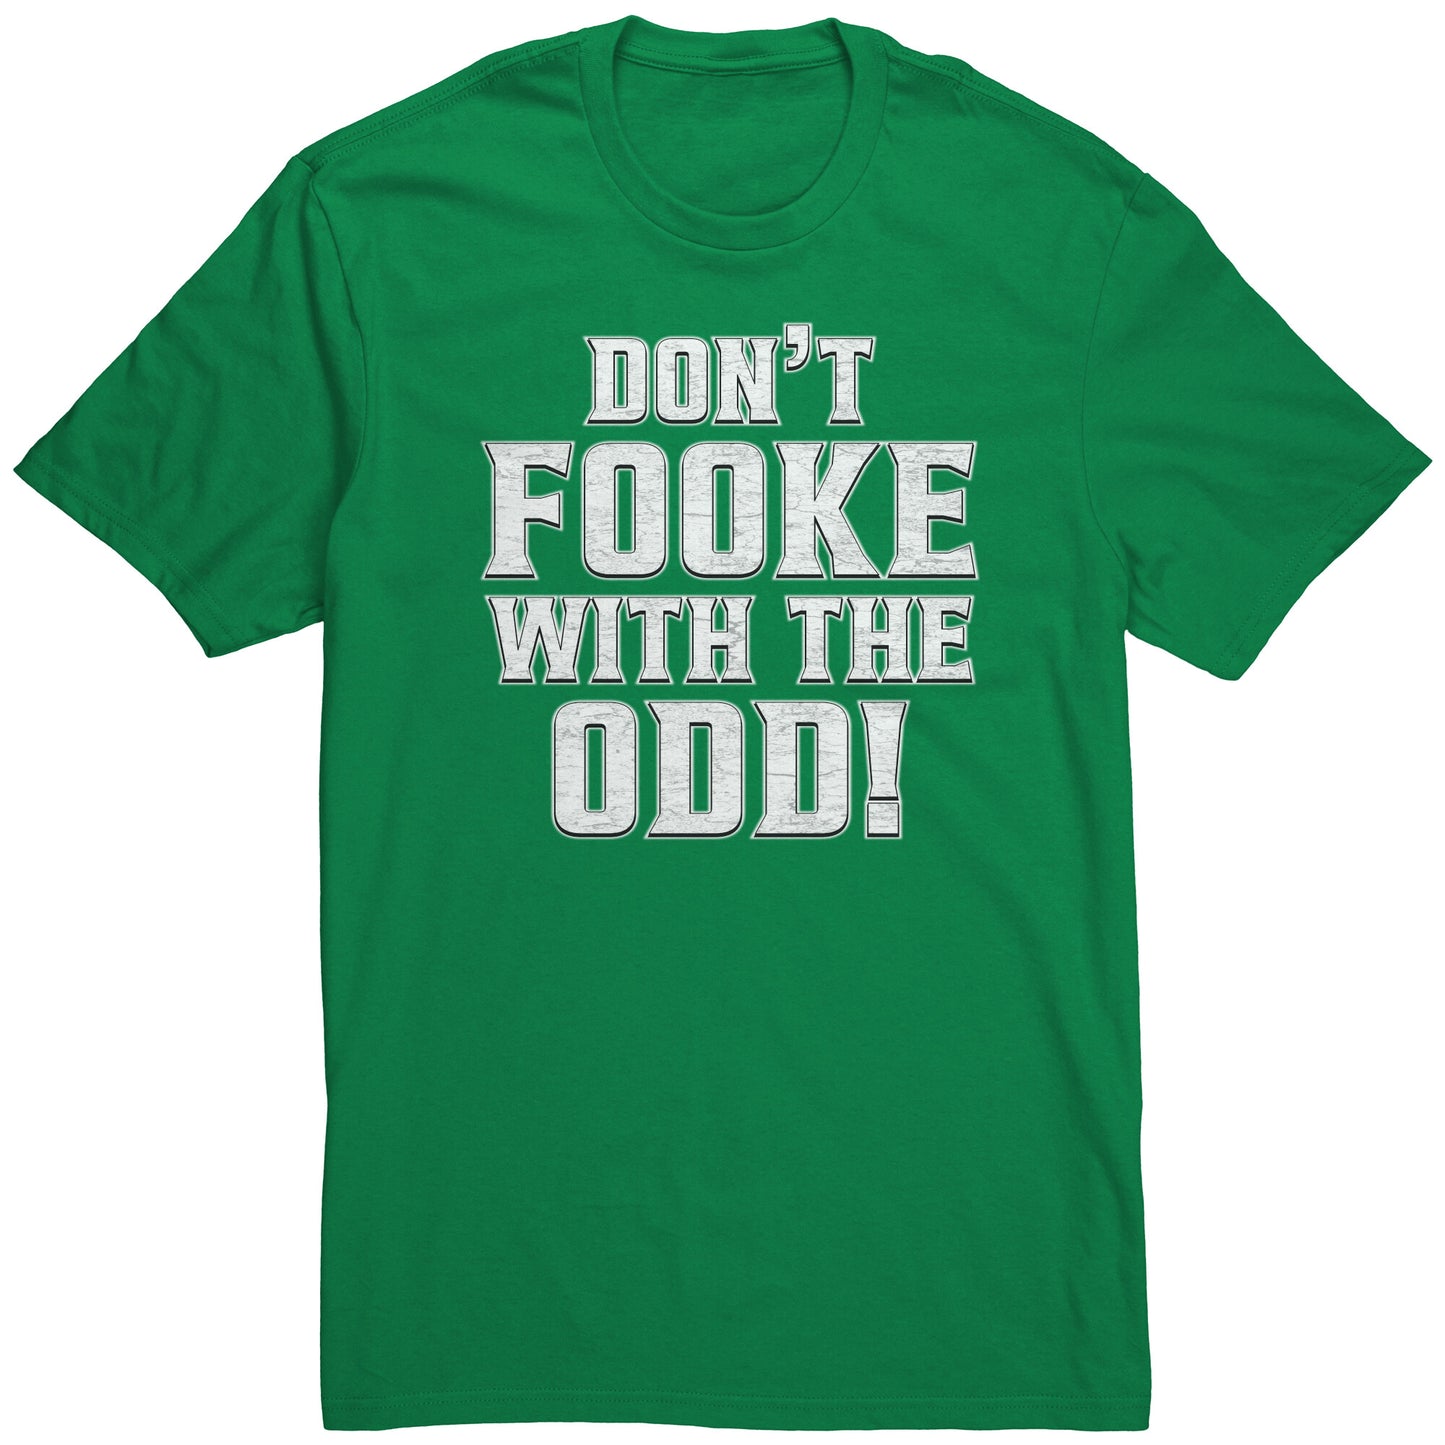 Don't Fooke With The Odd! Men's Dark-Colored Tee.